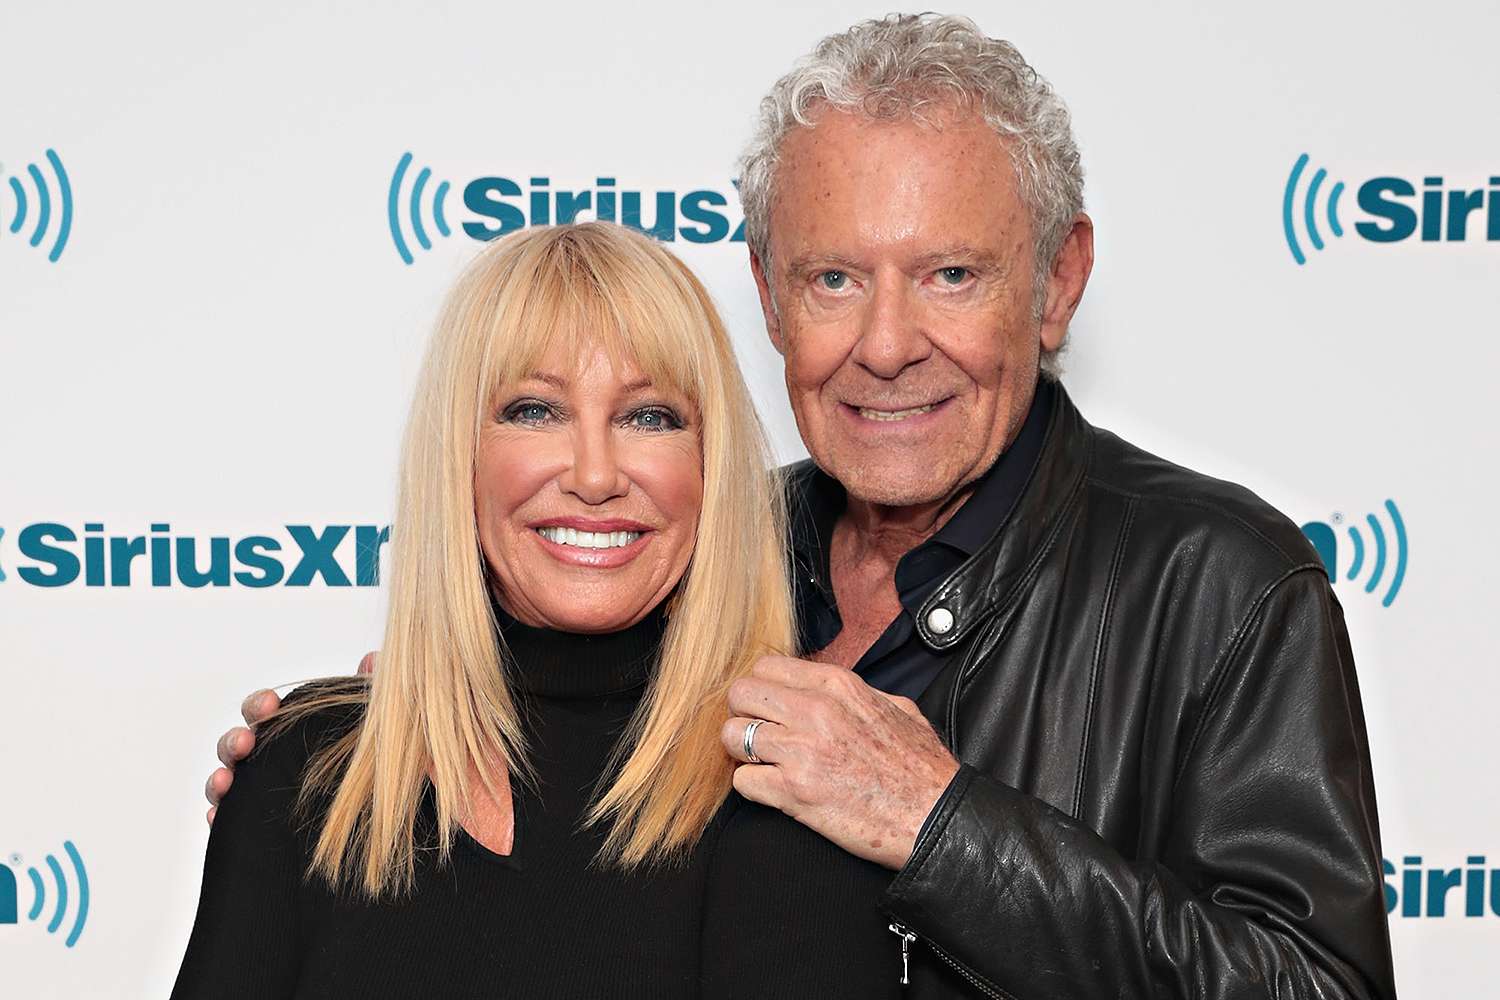 Suzanne Somers And Alan Hamel Celebrate 44 Years Of Marriage | People.com